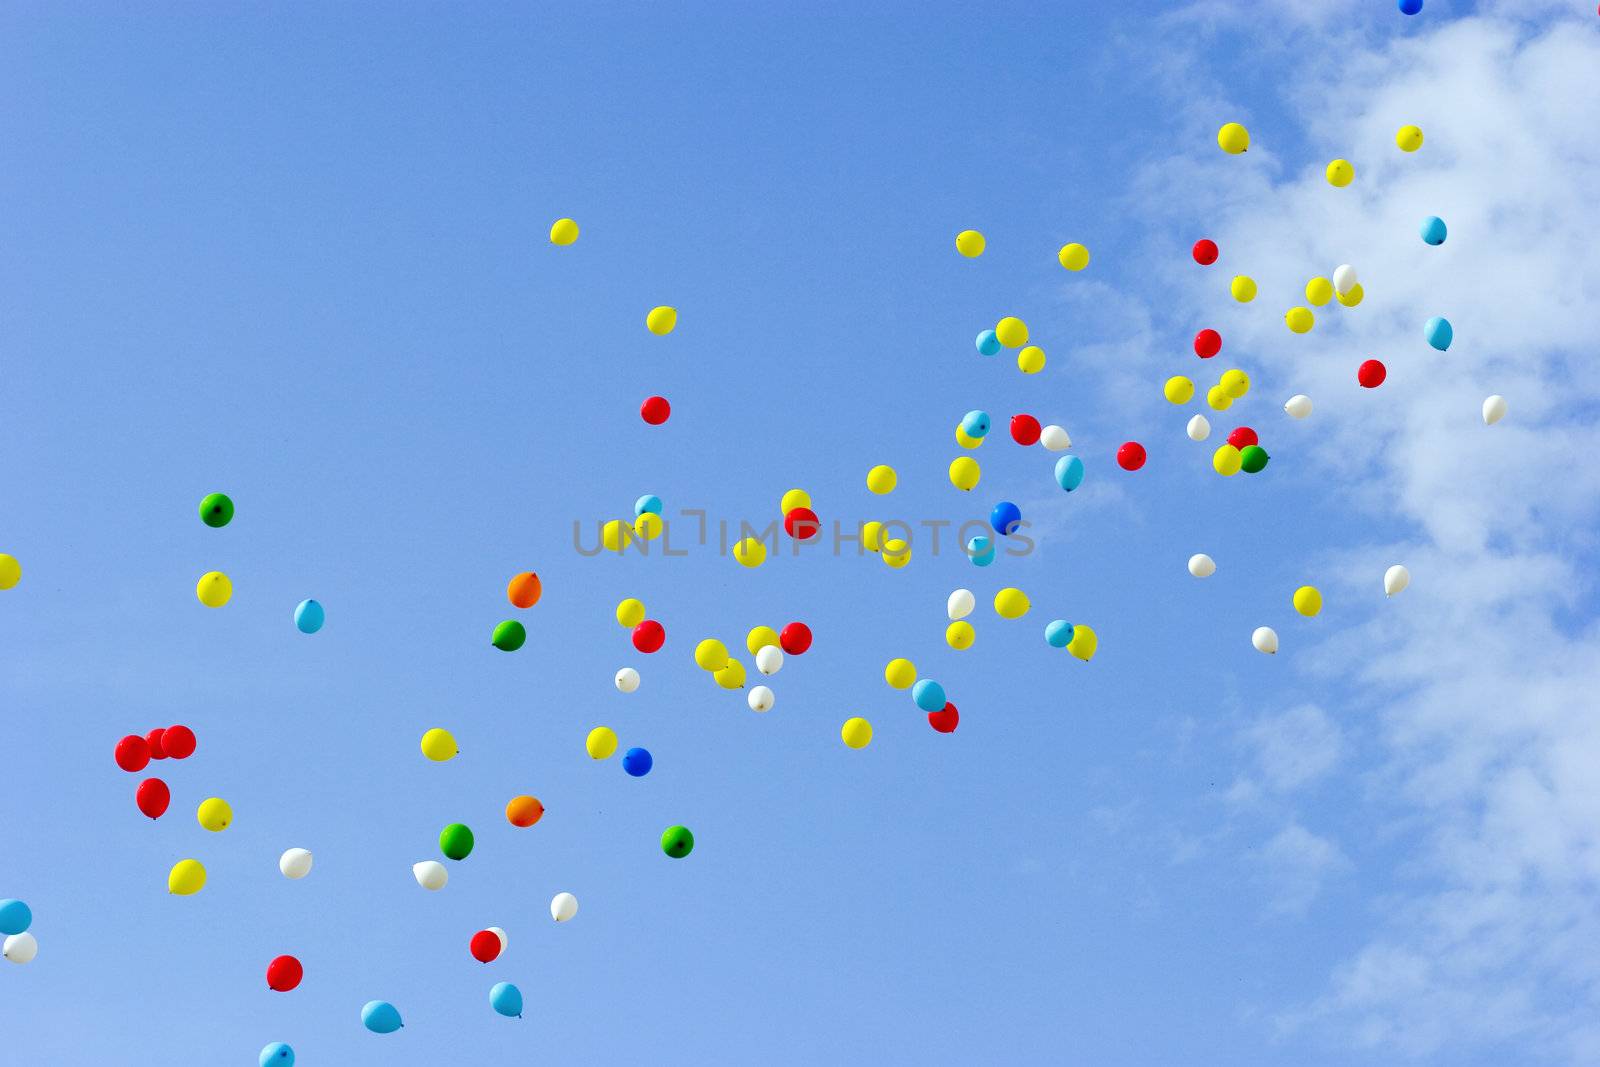 many multicolored balloons flying in blue sky